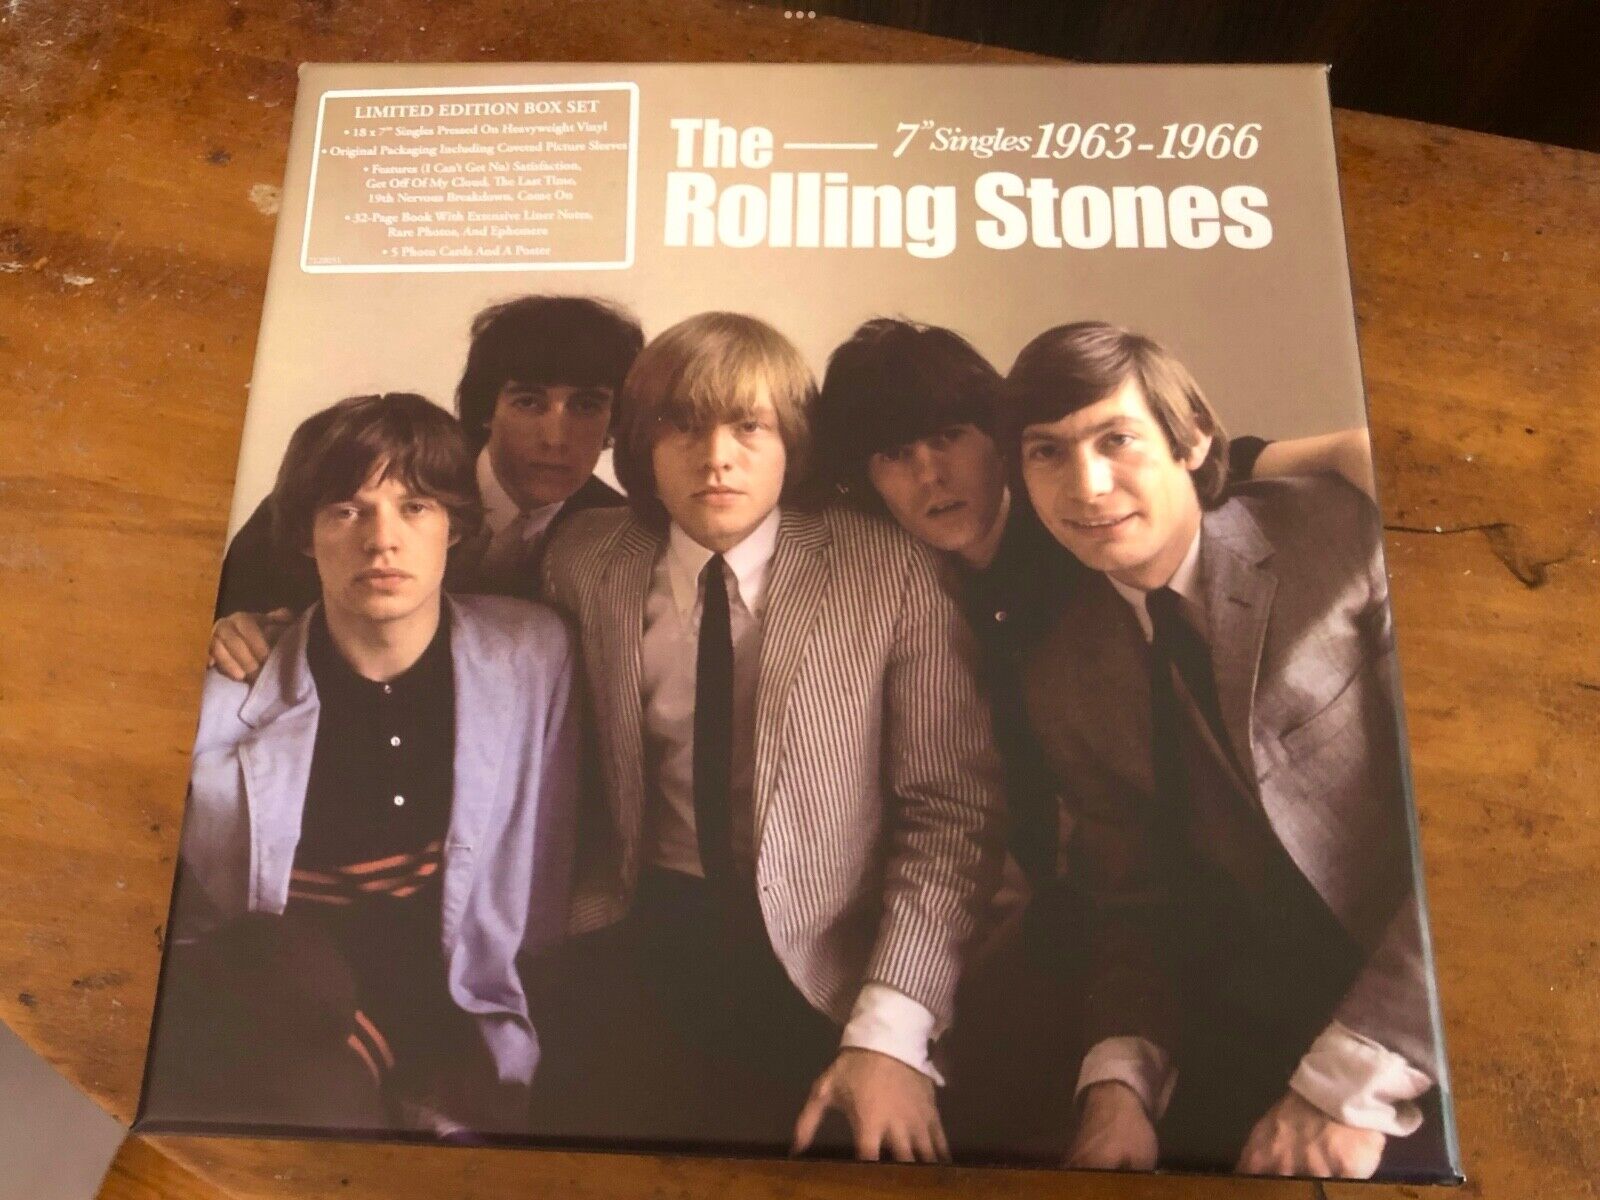 THE ROLLING STONES 7” SINGLES 1963-1966 LIKE NEW